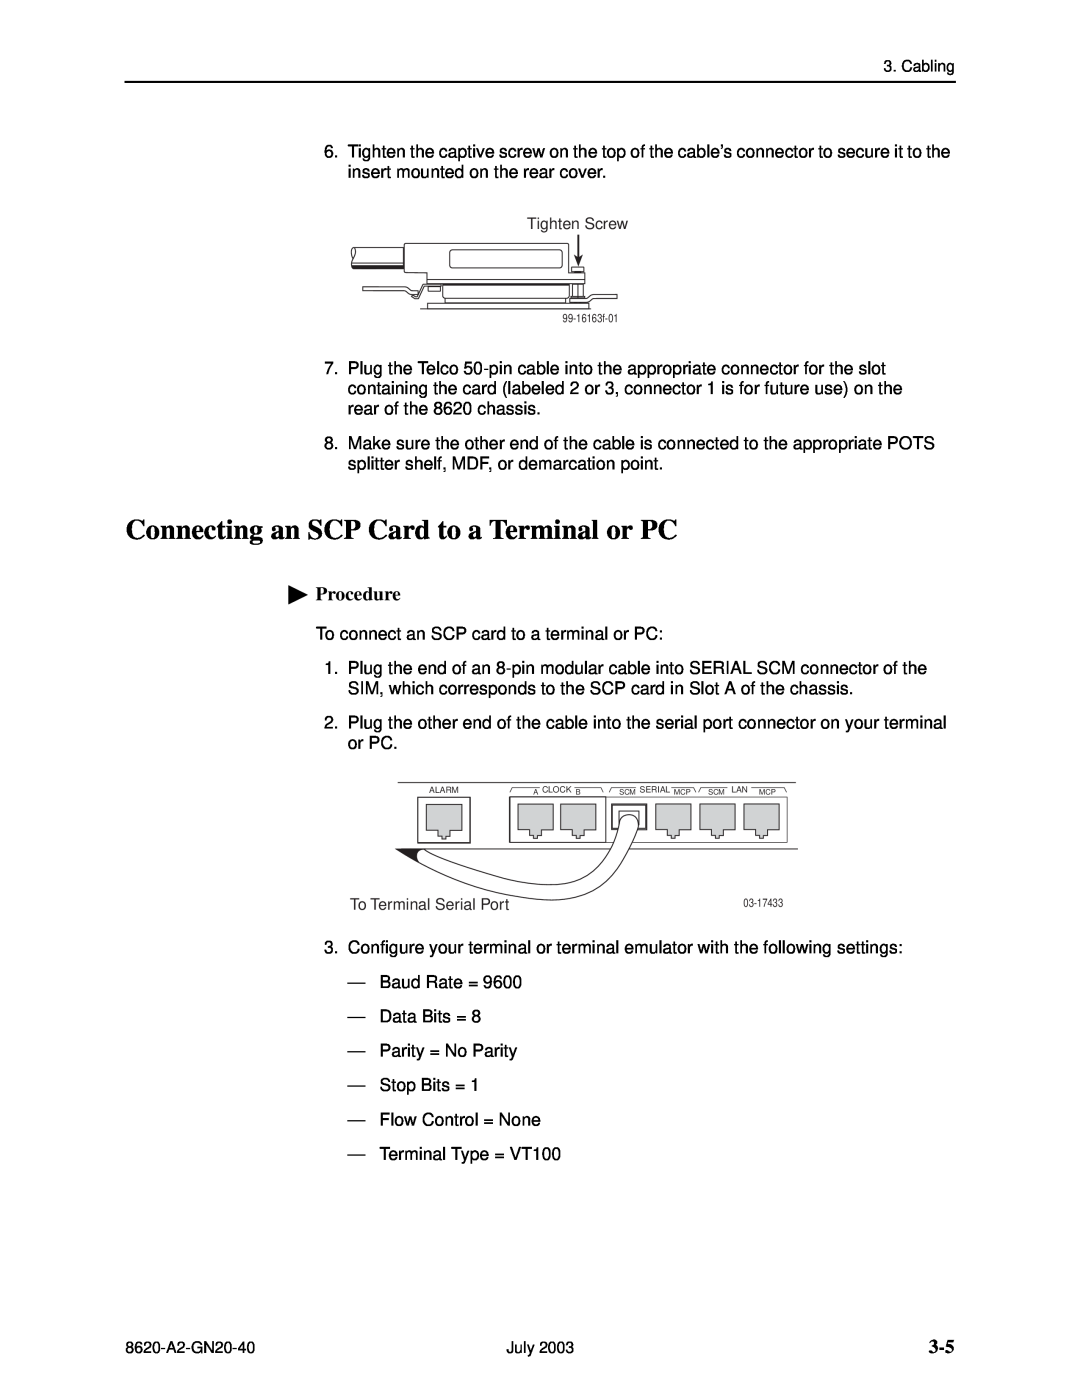 Paradyne Hotwire 8620 GranDSLAM Installation Guide manual Connecting an SCP Card to a Terminal or PC, Procedure 